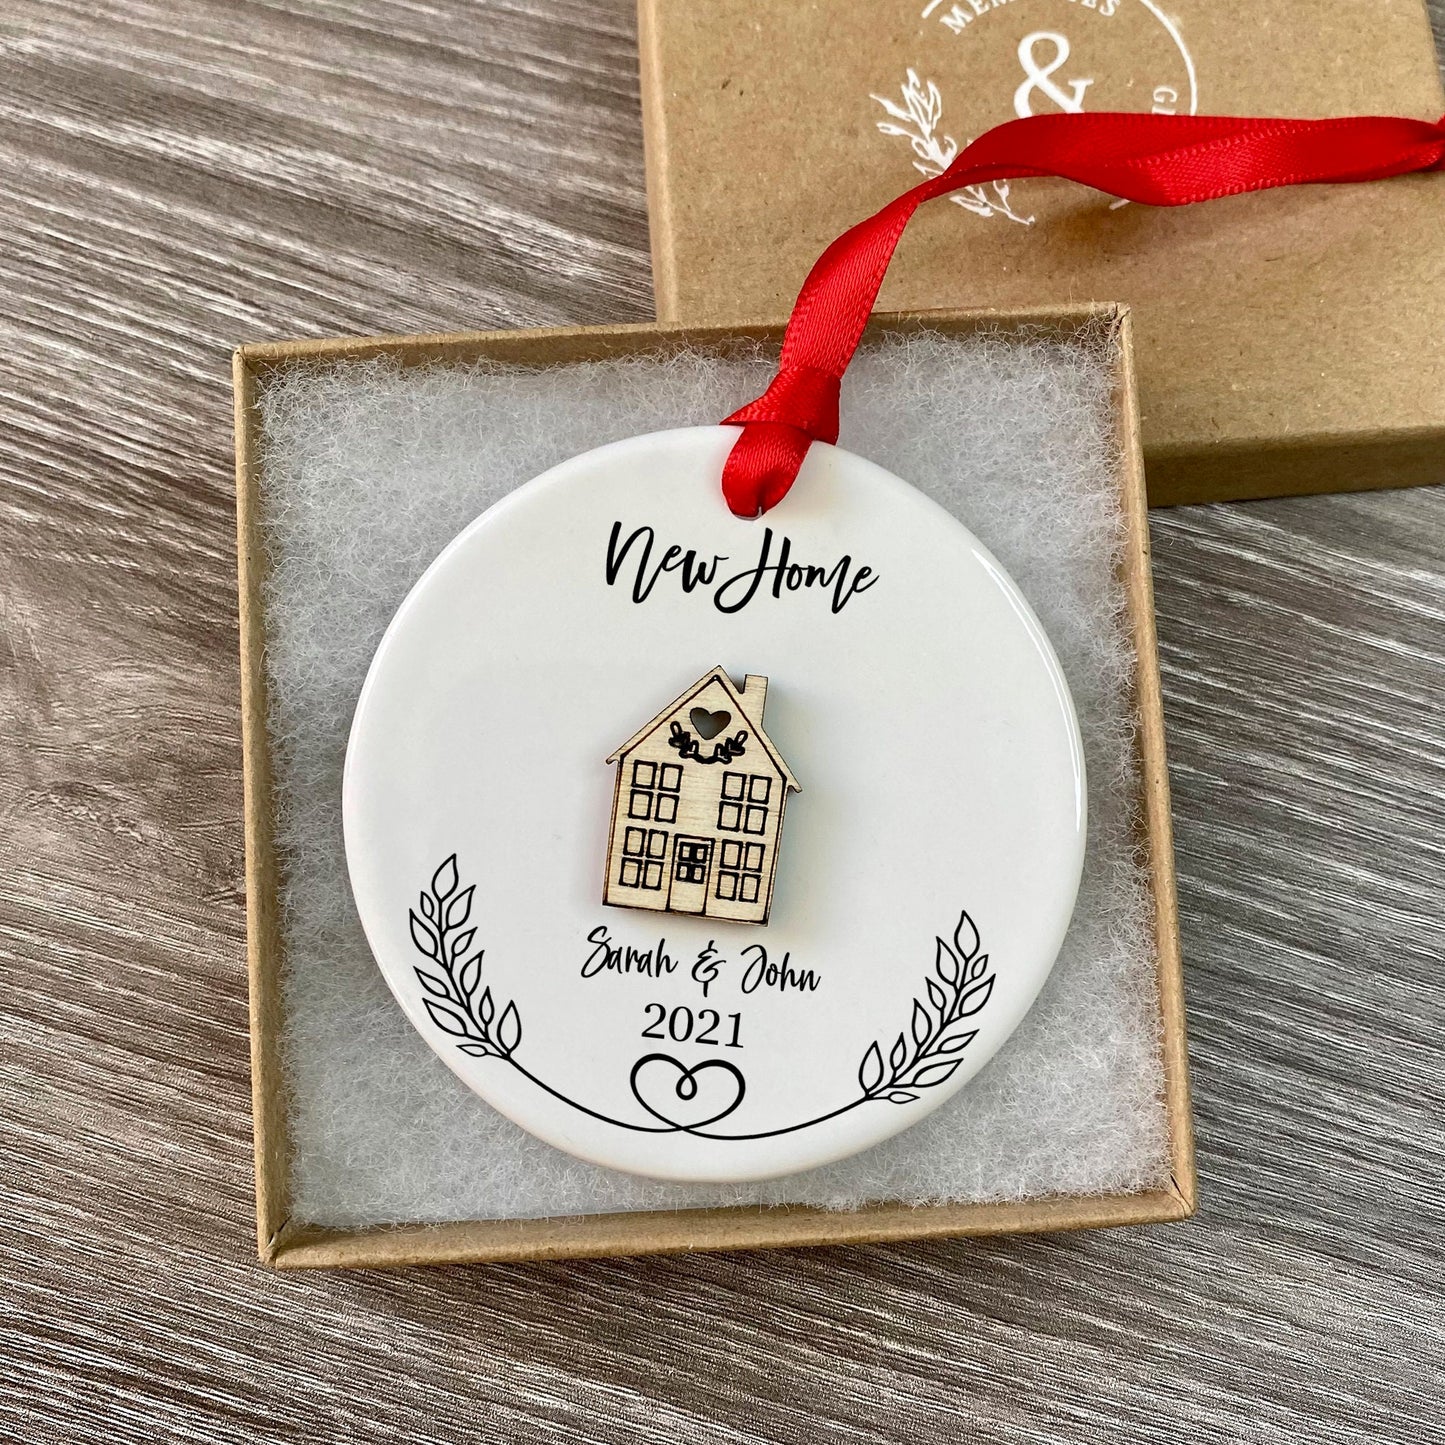 Personalised Ceramic New Home Round Decoration Ornament, Wooden house Christmas Decoration, New Home Gift